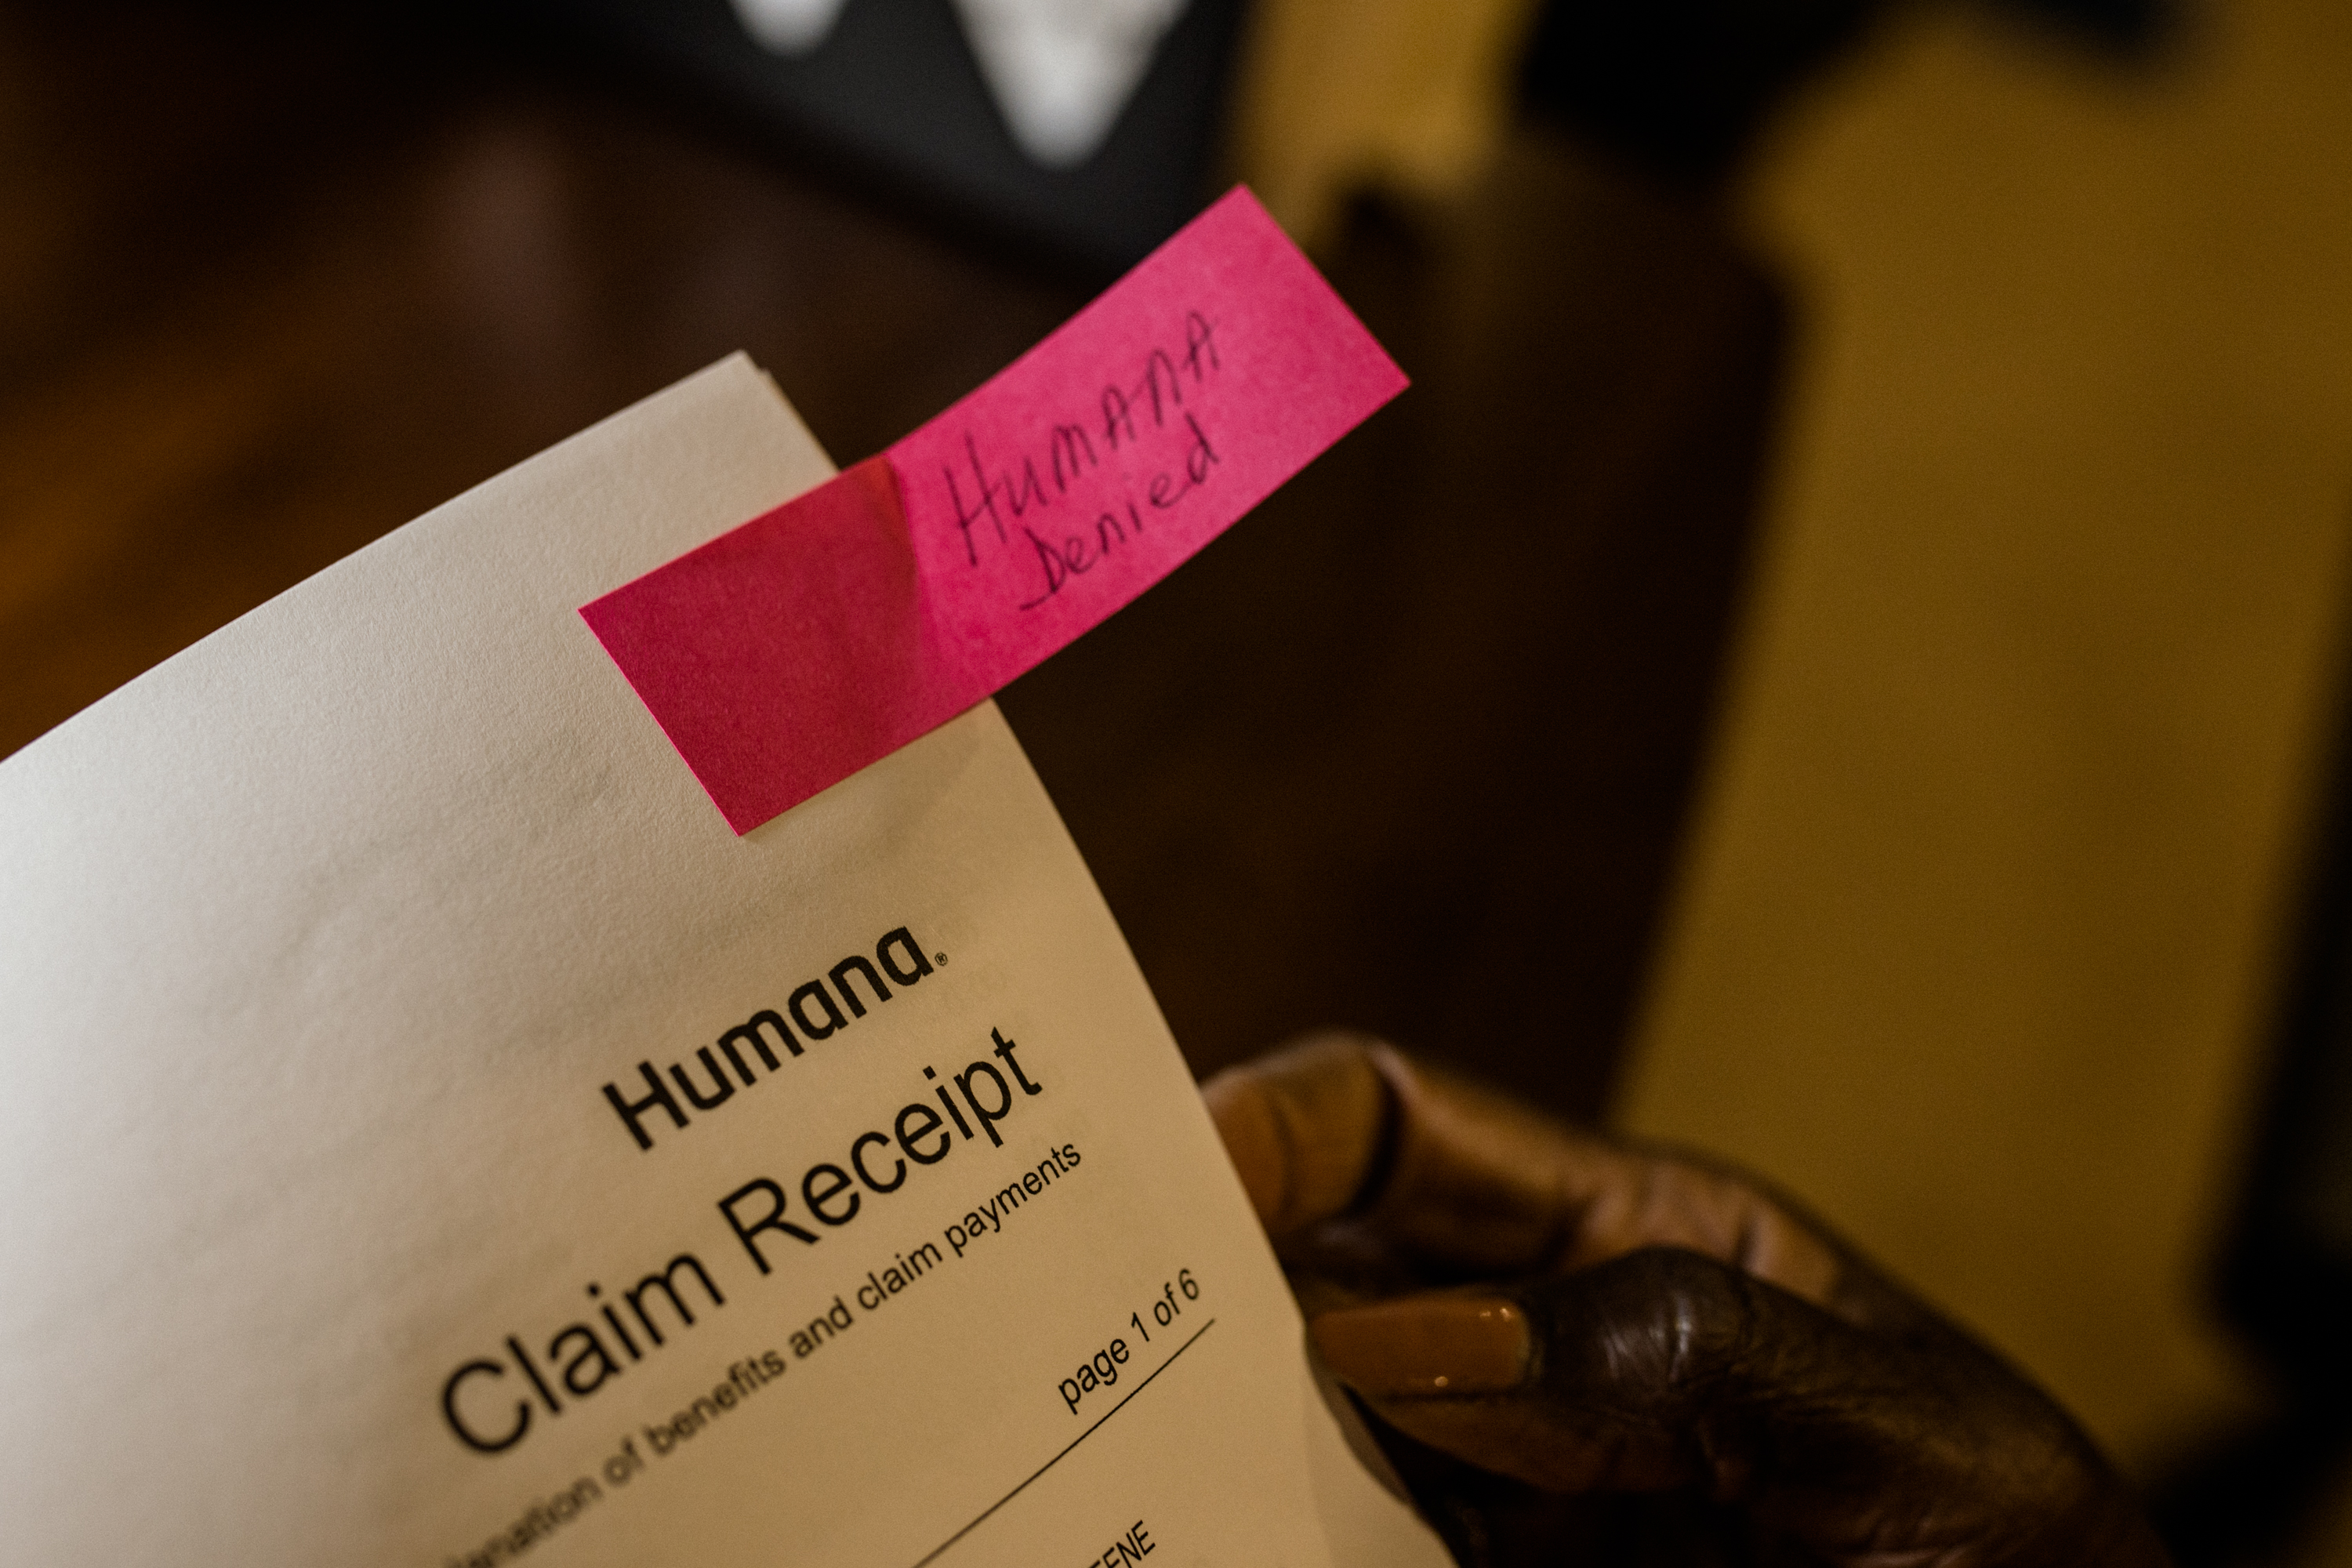 An up-close photo of an insurance claim. It reads, "Humana Claim Receipt". At the top right corner, there is a pink Post-It note that reads "Humana Denied" in script.